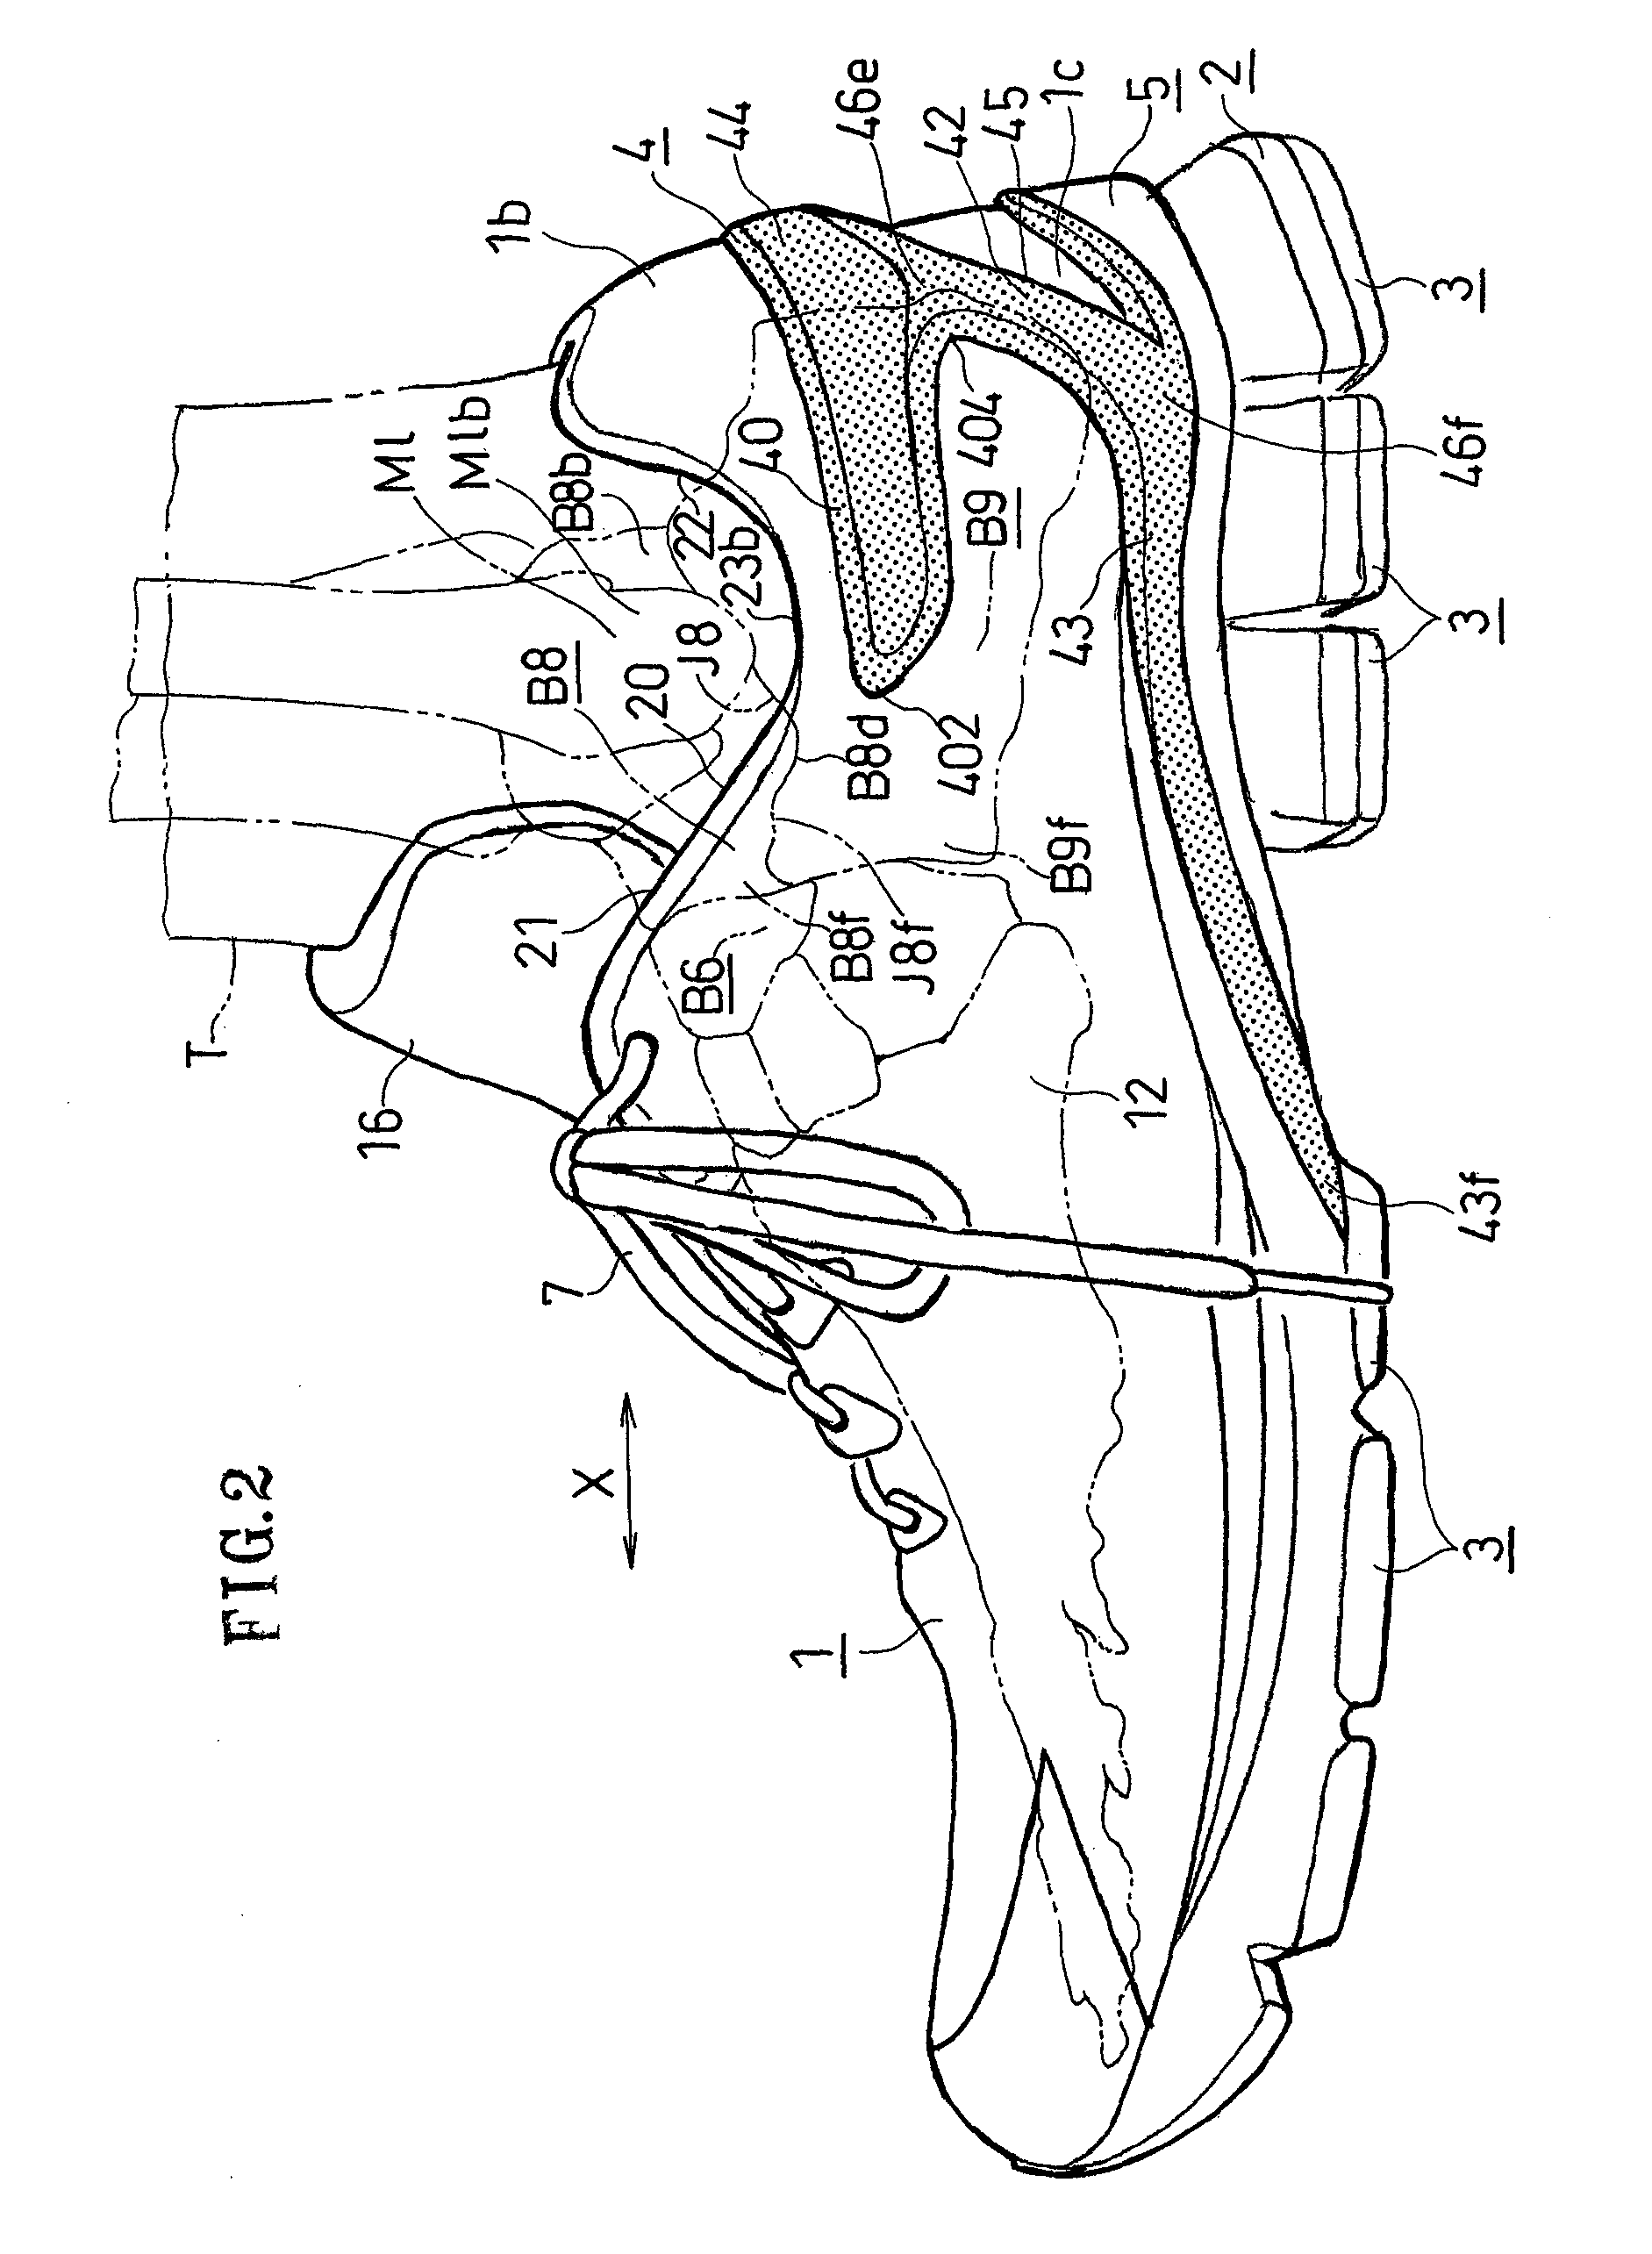 Athletic shoe with heel counter for maintaining shape of heel section